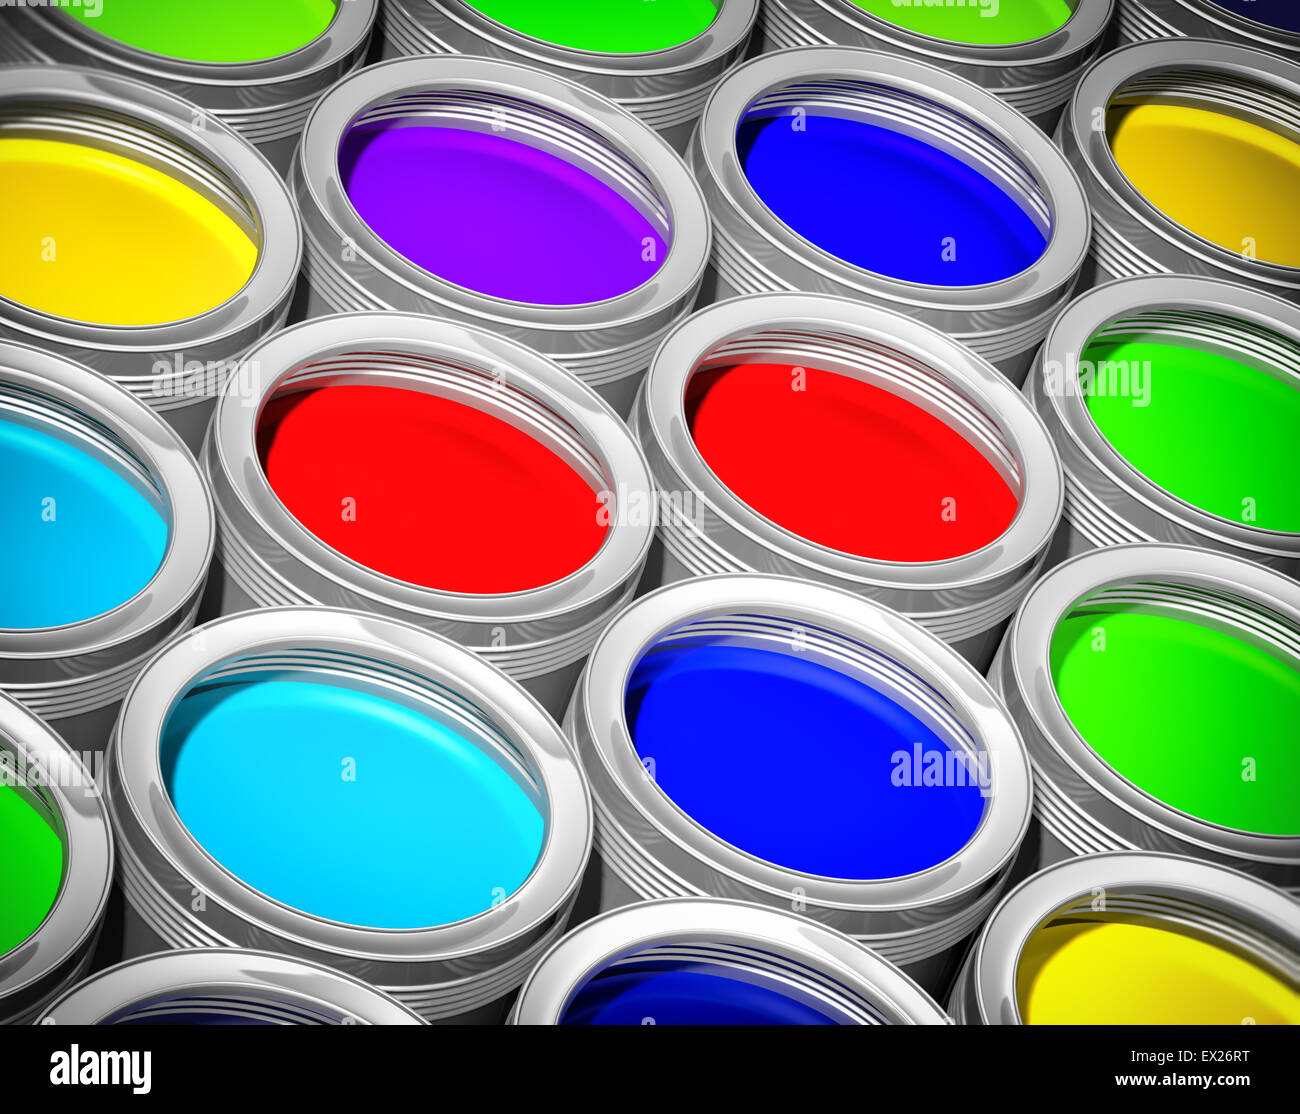 Multi color paint containers Stock Photo - Alamy